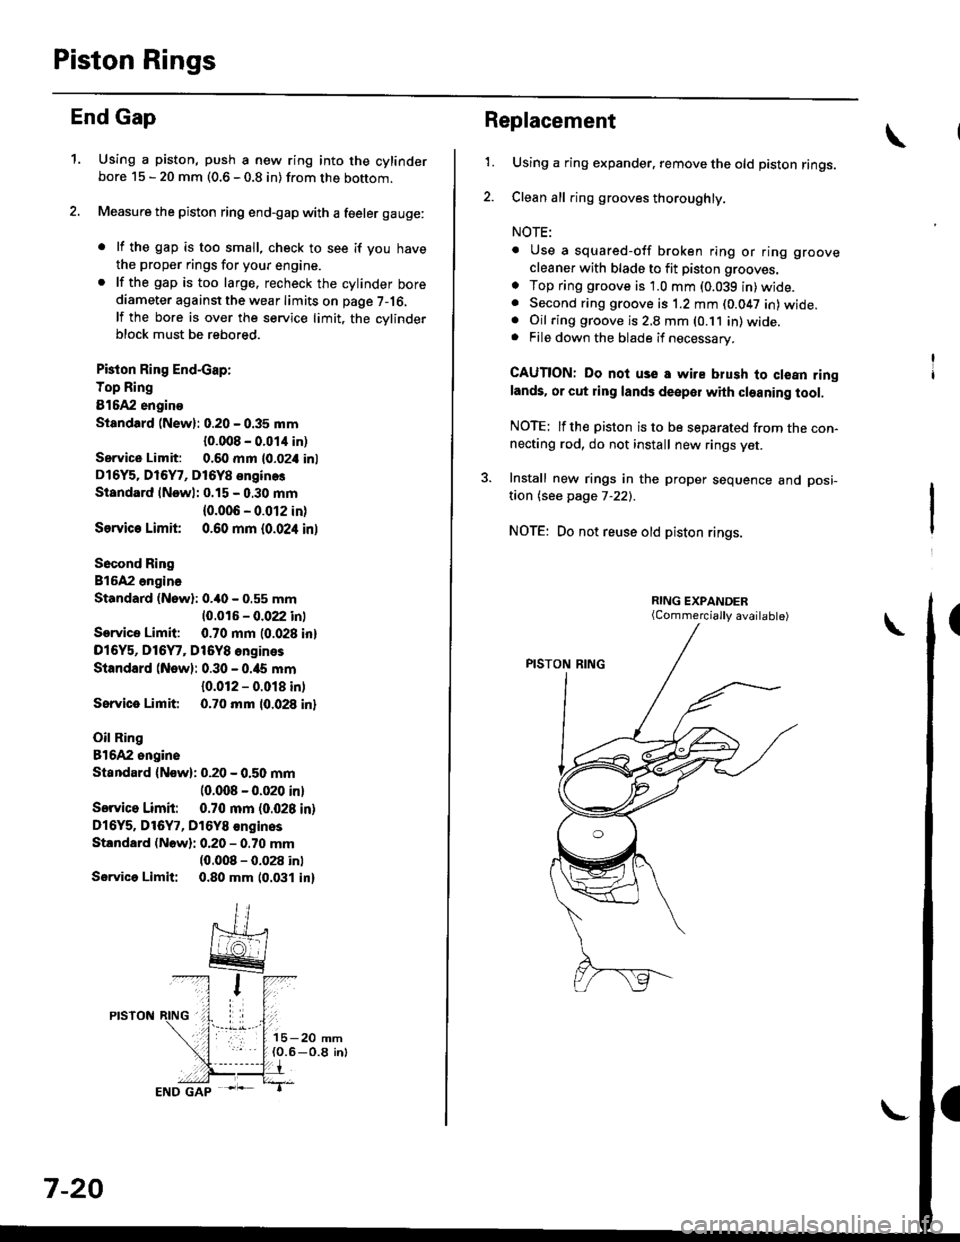 HONDA CIVIC 1996 6.G User Guide Piston Rings
End Gap
1.Using a piston, push a new ring into the cylinderbore 15 - 20 mm (0.6 - 0.8 in) from the bottom.
Measure the piston ring end-gap with a feeler gauge:
. lf the gap is too small, 